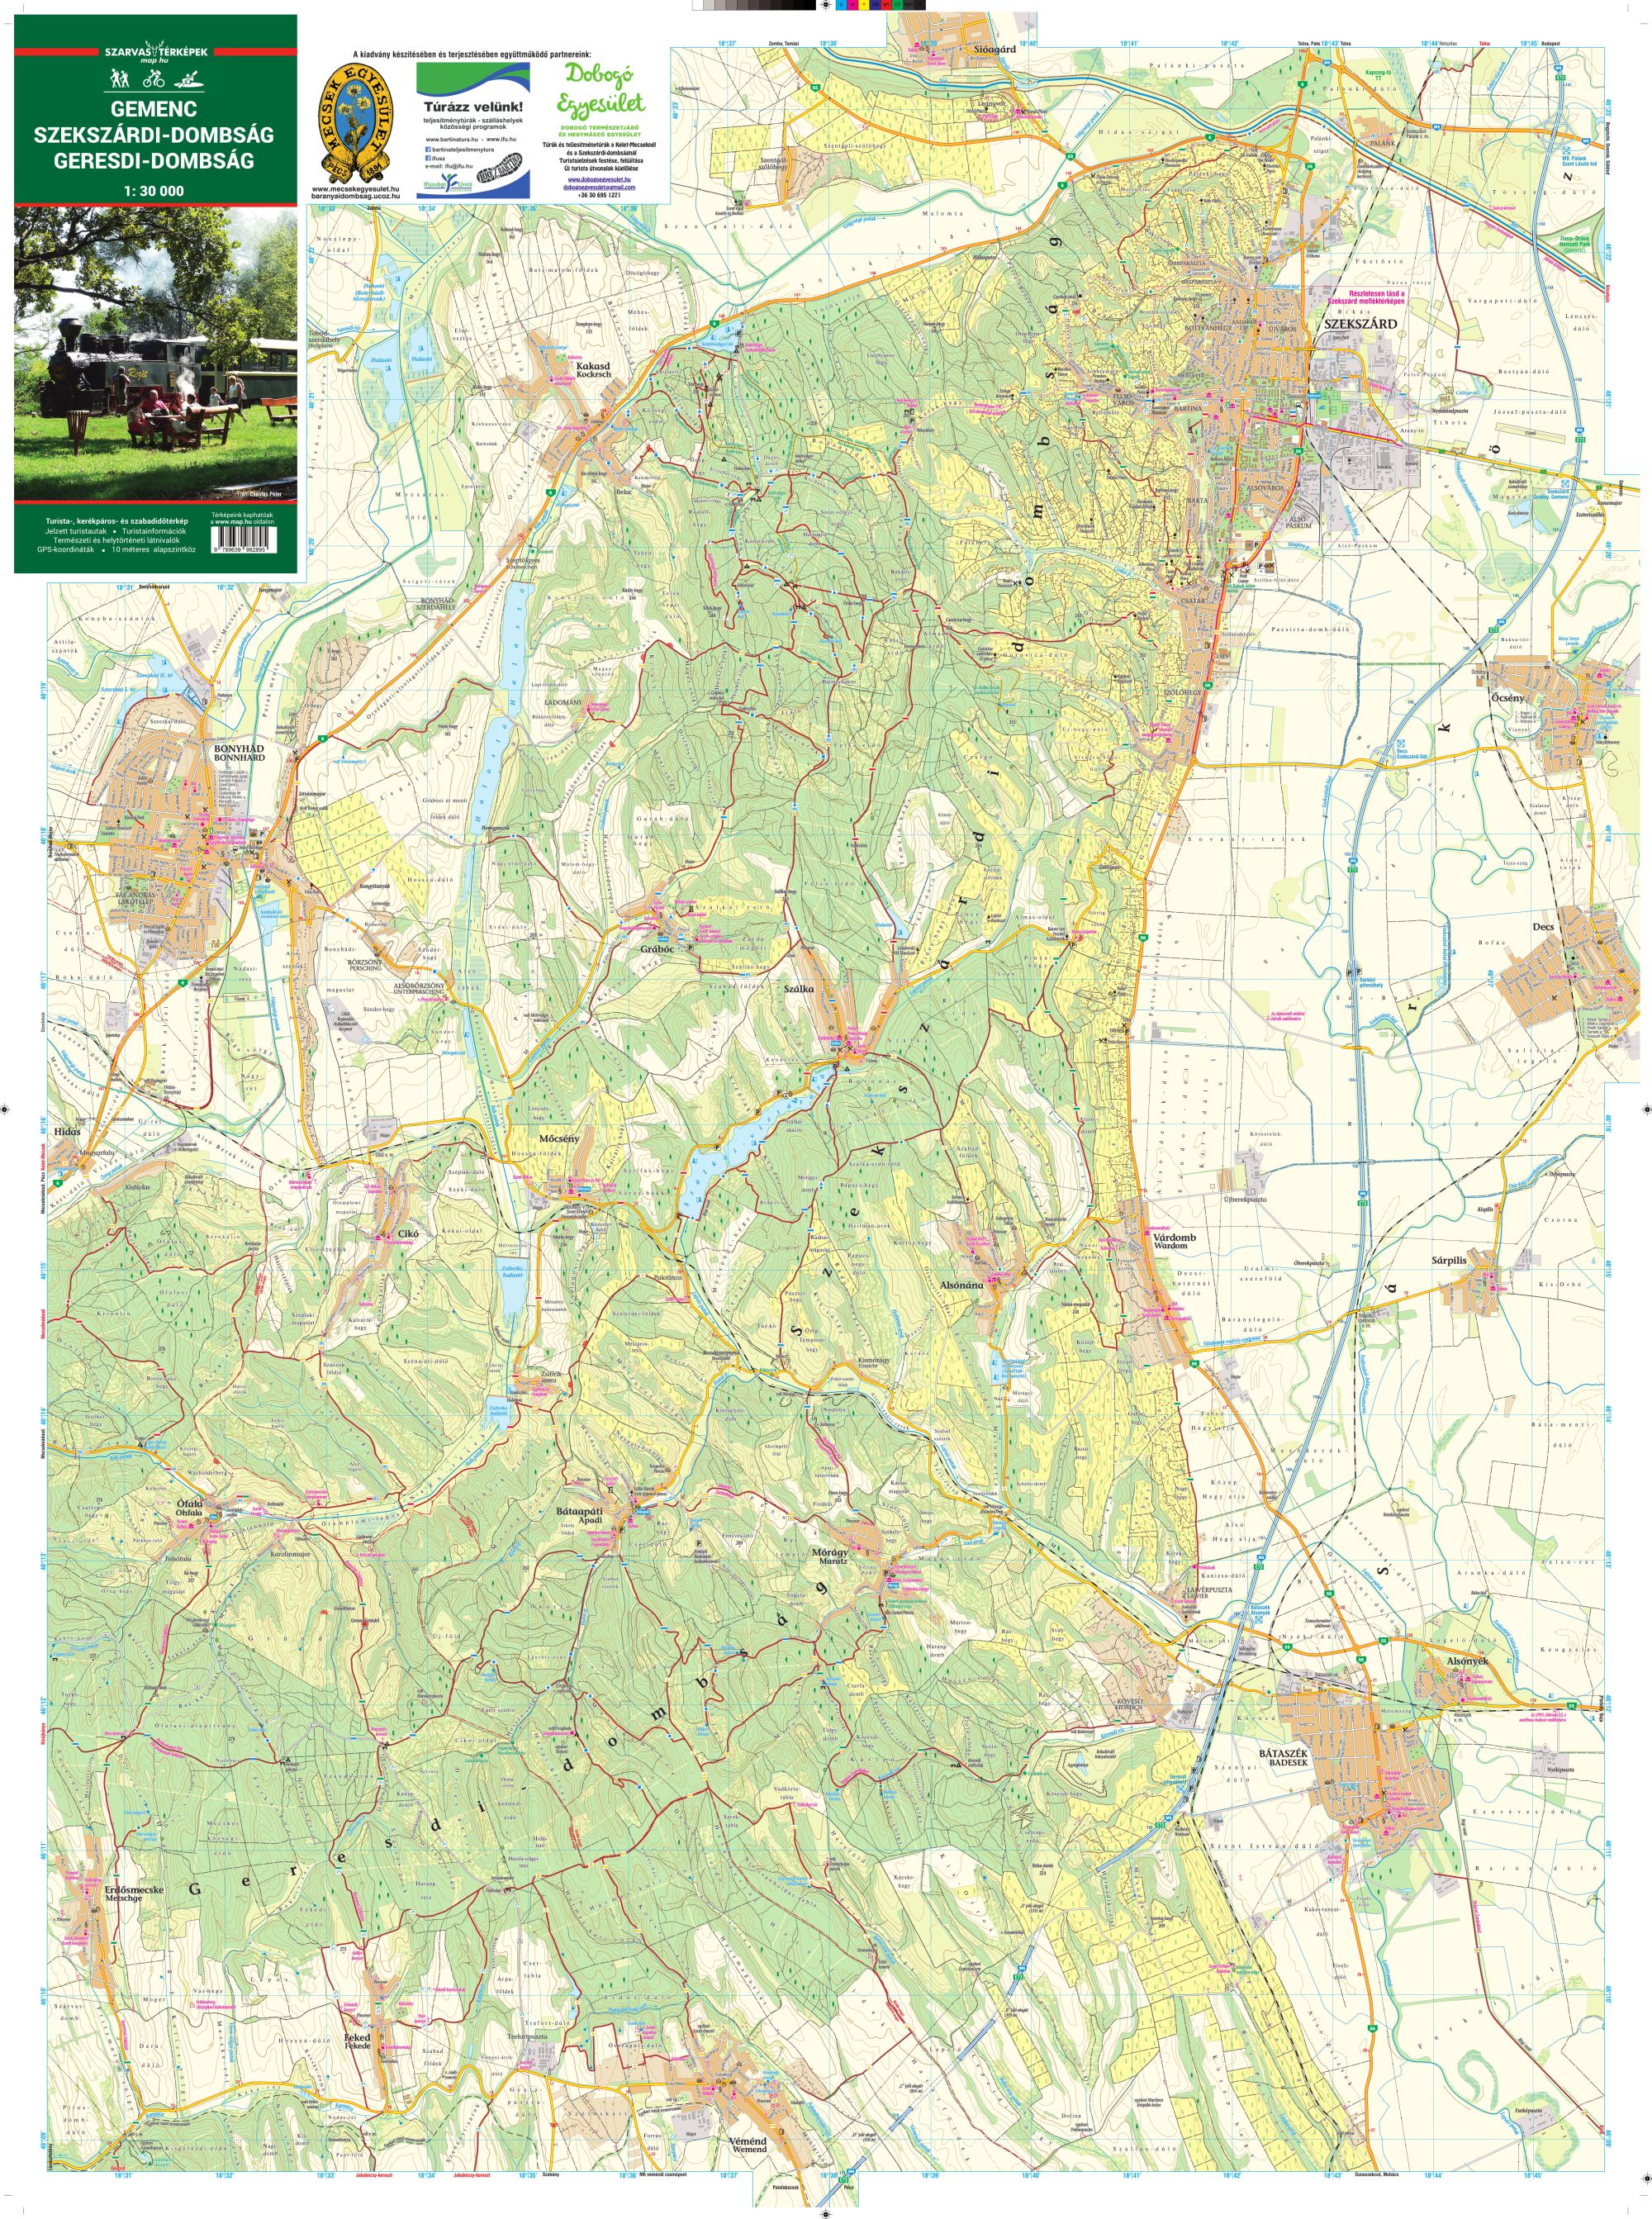 Area covered by the map Szekszárd hills/Geresd hills